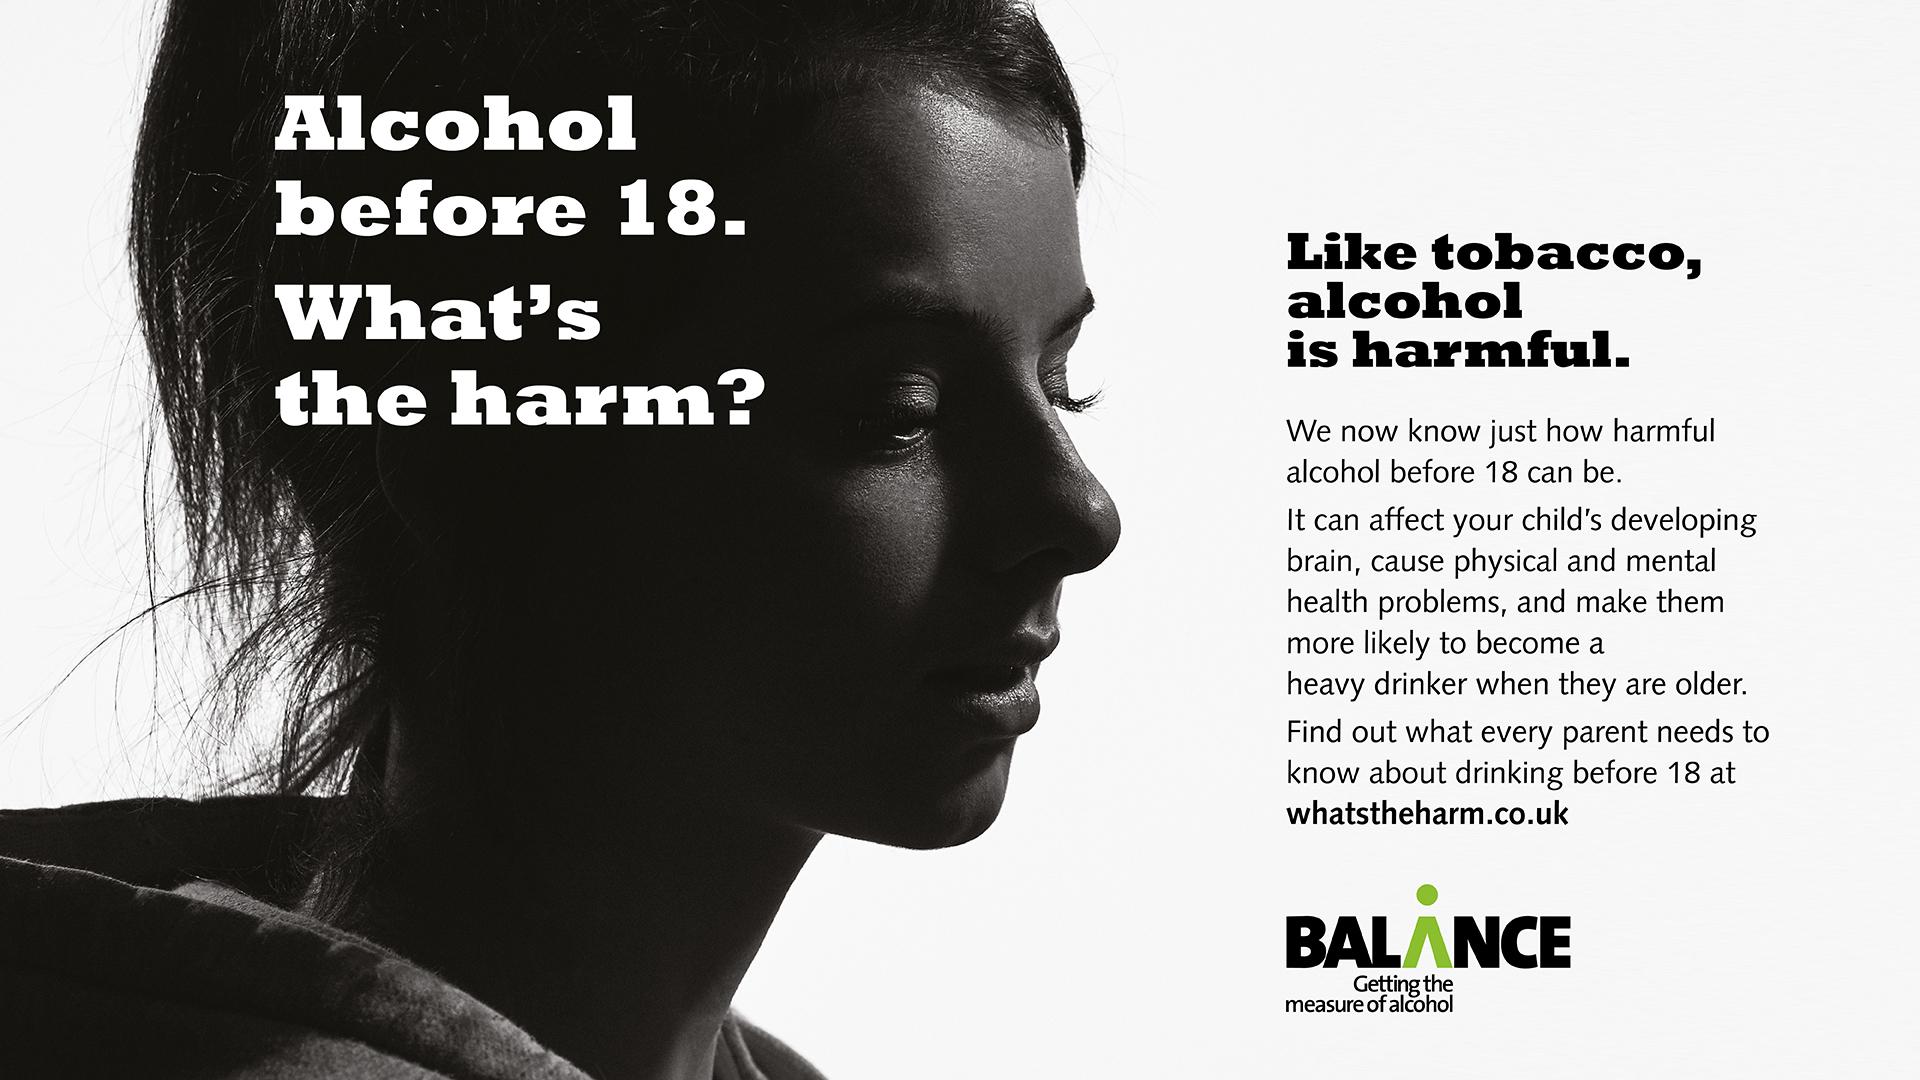 What is the harm campaign